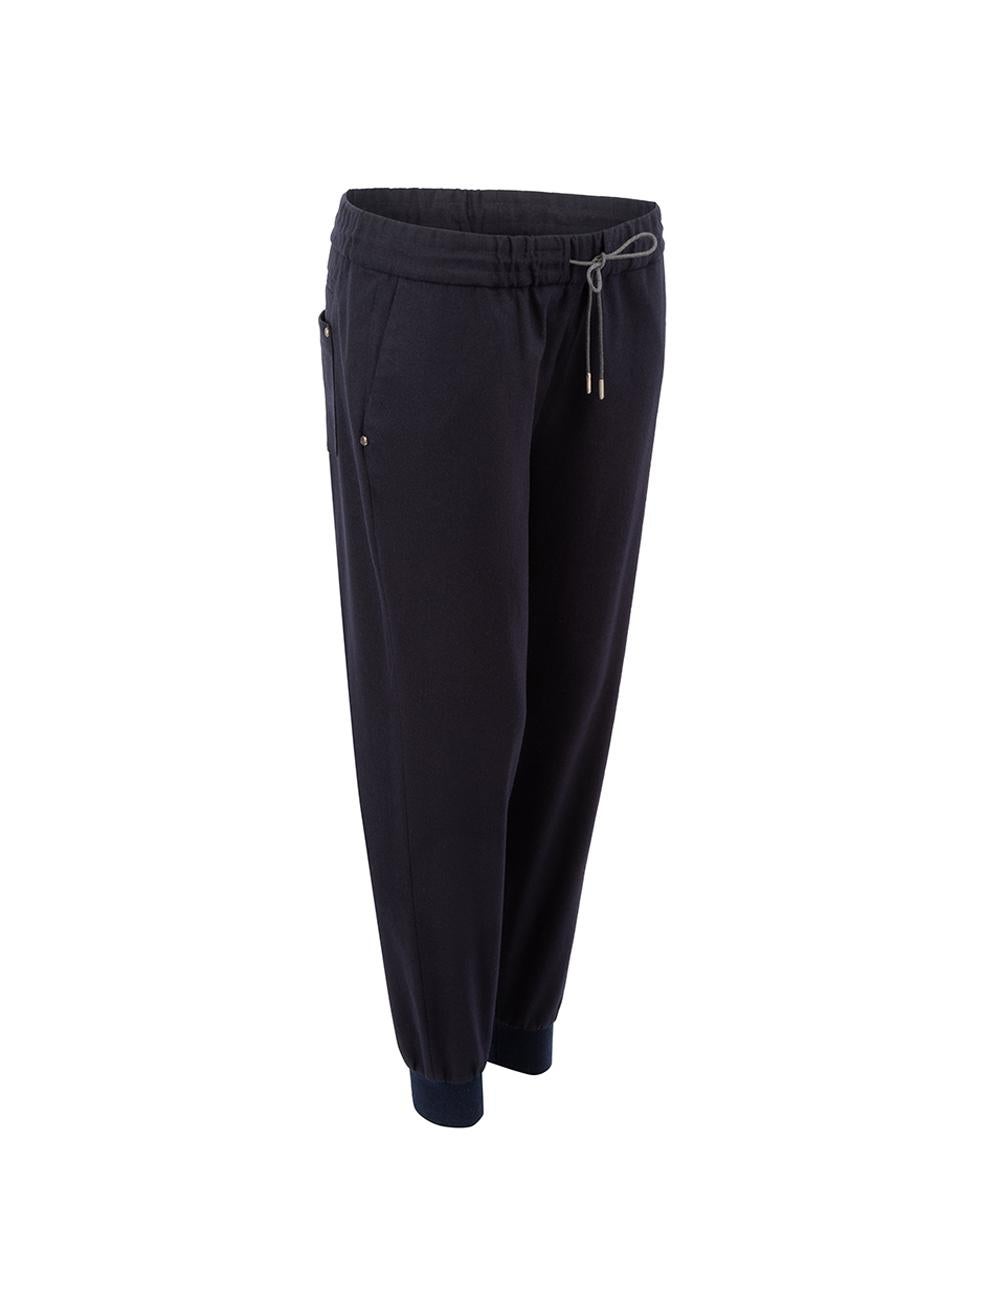 CONDITION is Very good. Hardly any visible wear to trousers is evident on this used Fabiana Filippi designer resale item.



Details


Navy

Wool

Tapered jogging trousers

High rise

Elasticated waistband with drawstring

Elasticated leg hem

Front